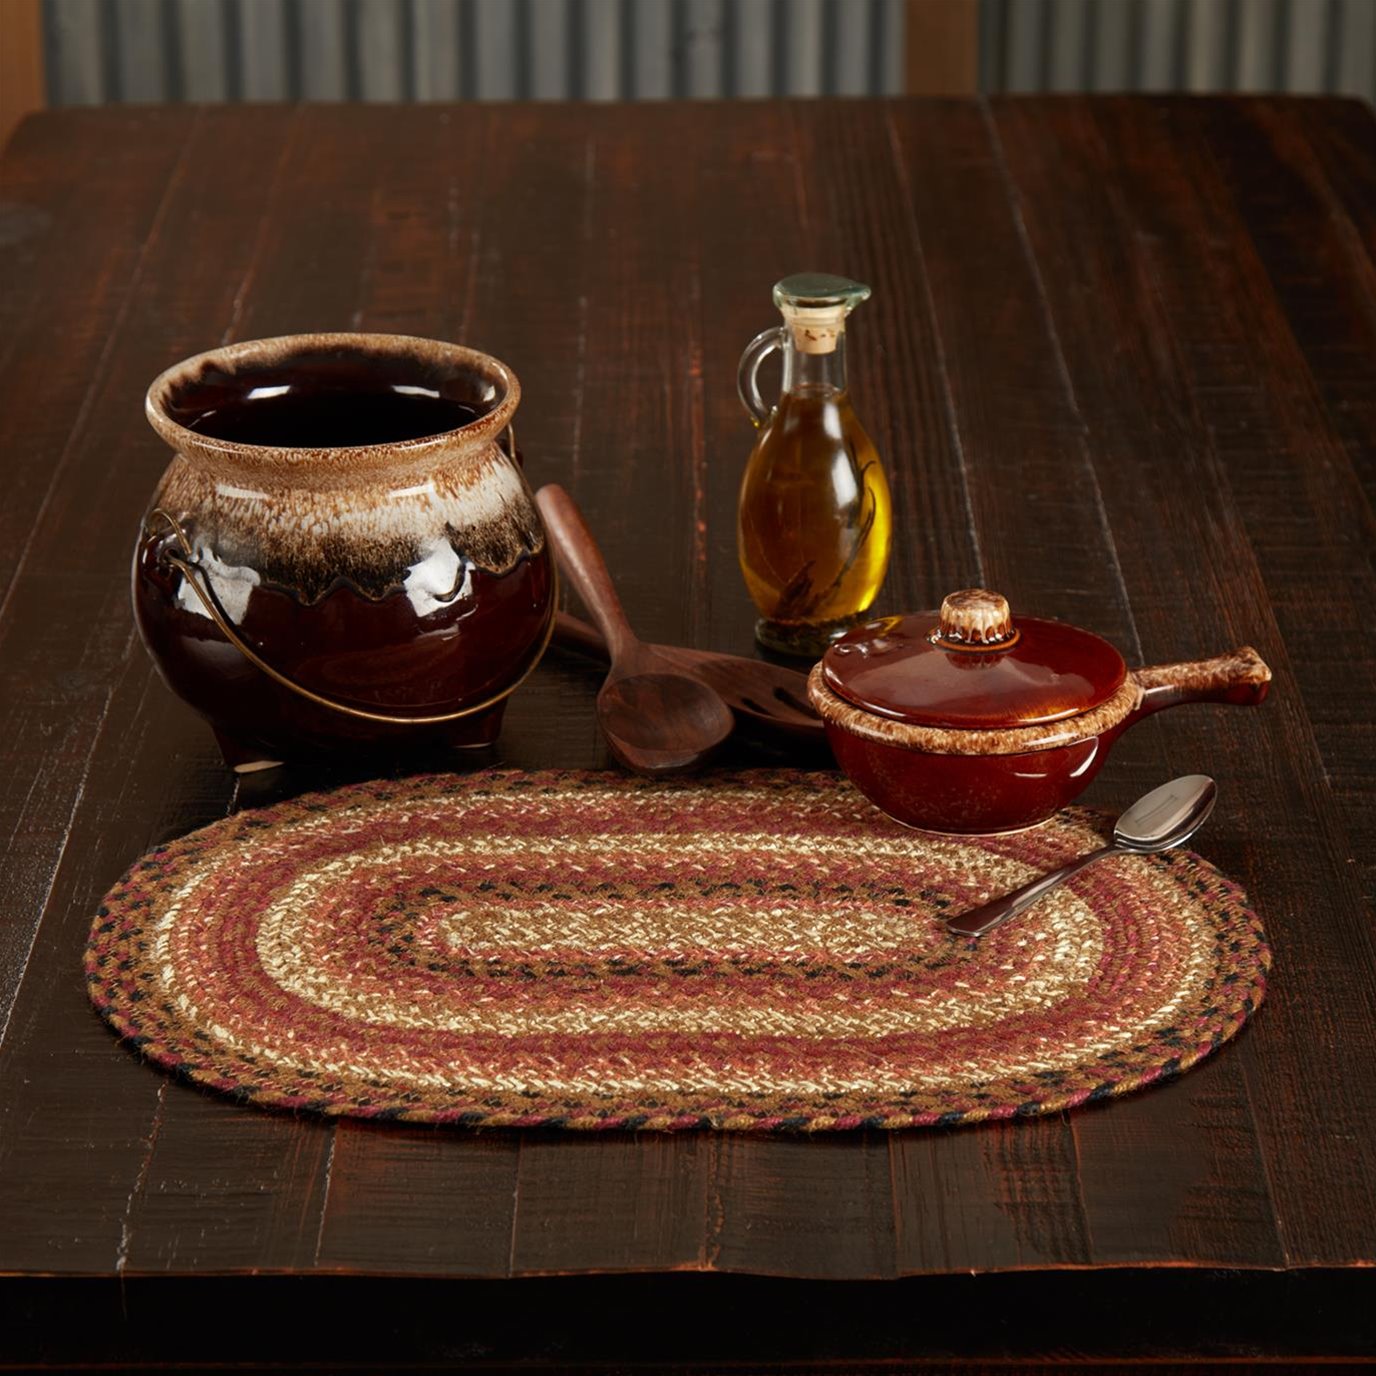 Ginger Spice Jute Oval Placemat 12x18